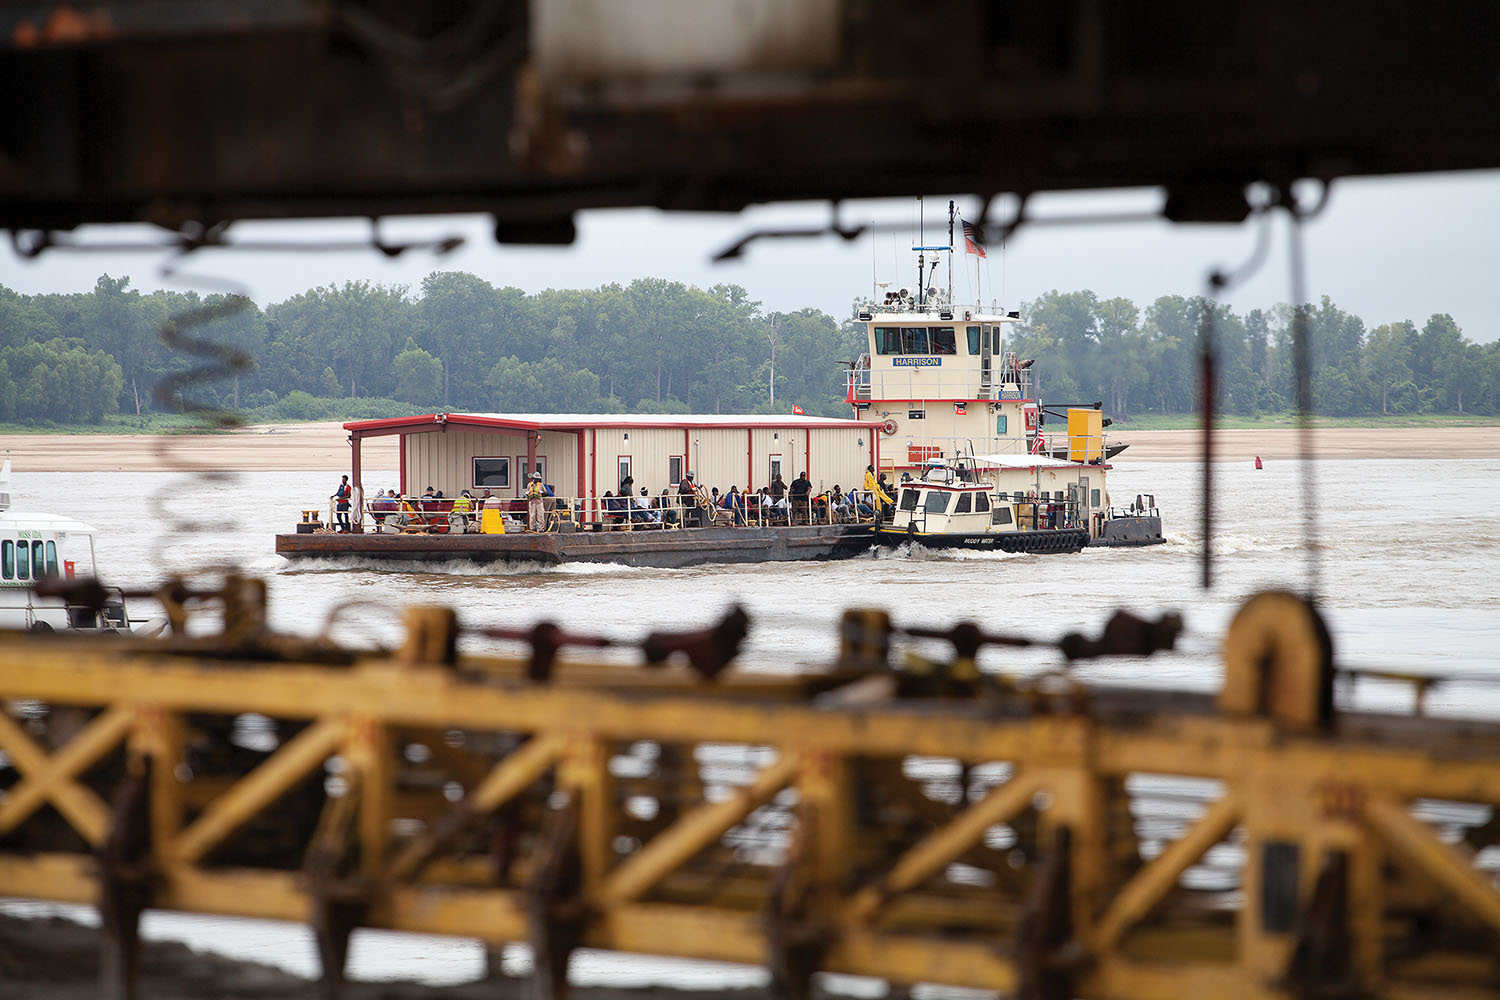 The mv. Harrison bringing the revetment crew back to the MSU after lunch. (Photo by Frank McCormack)